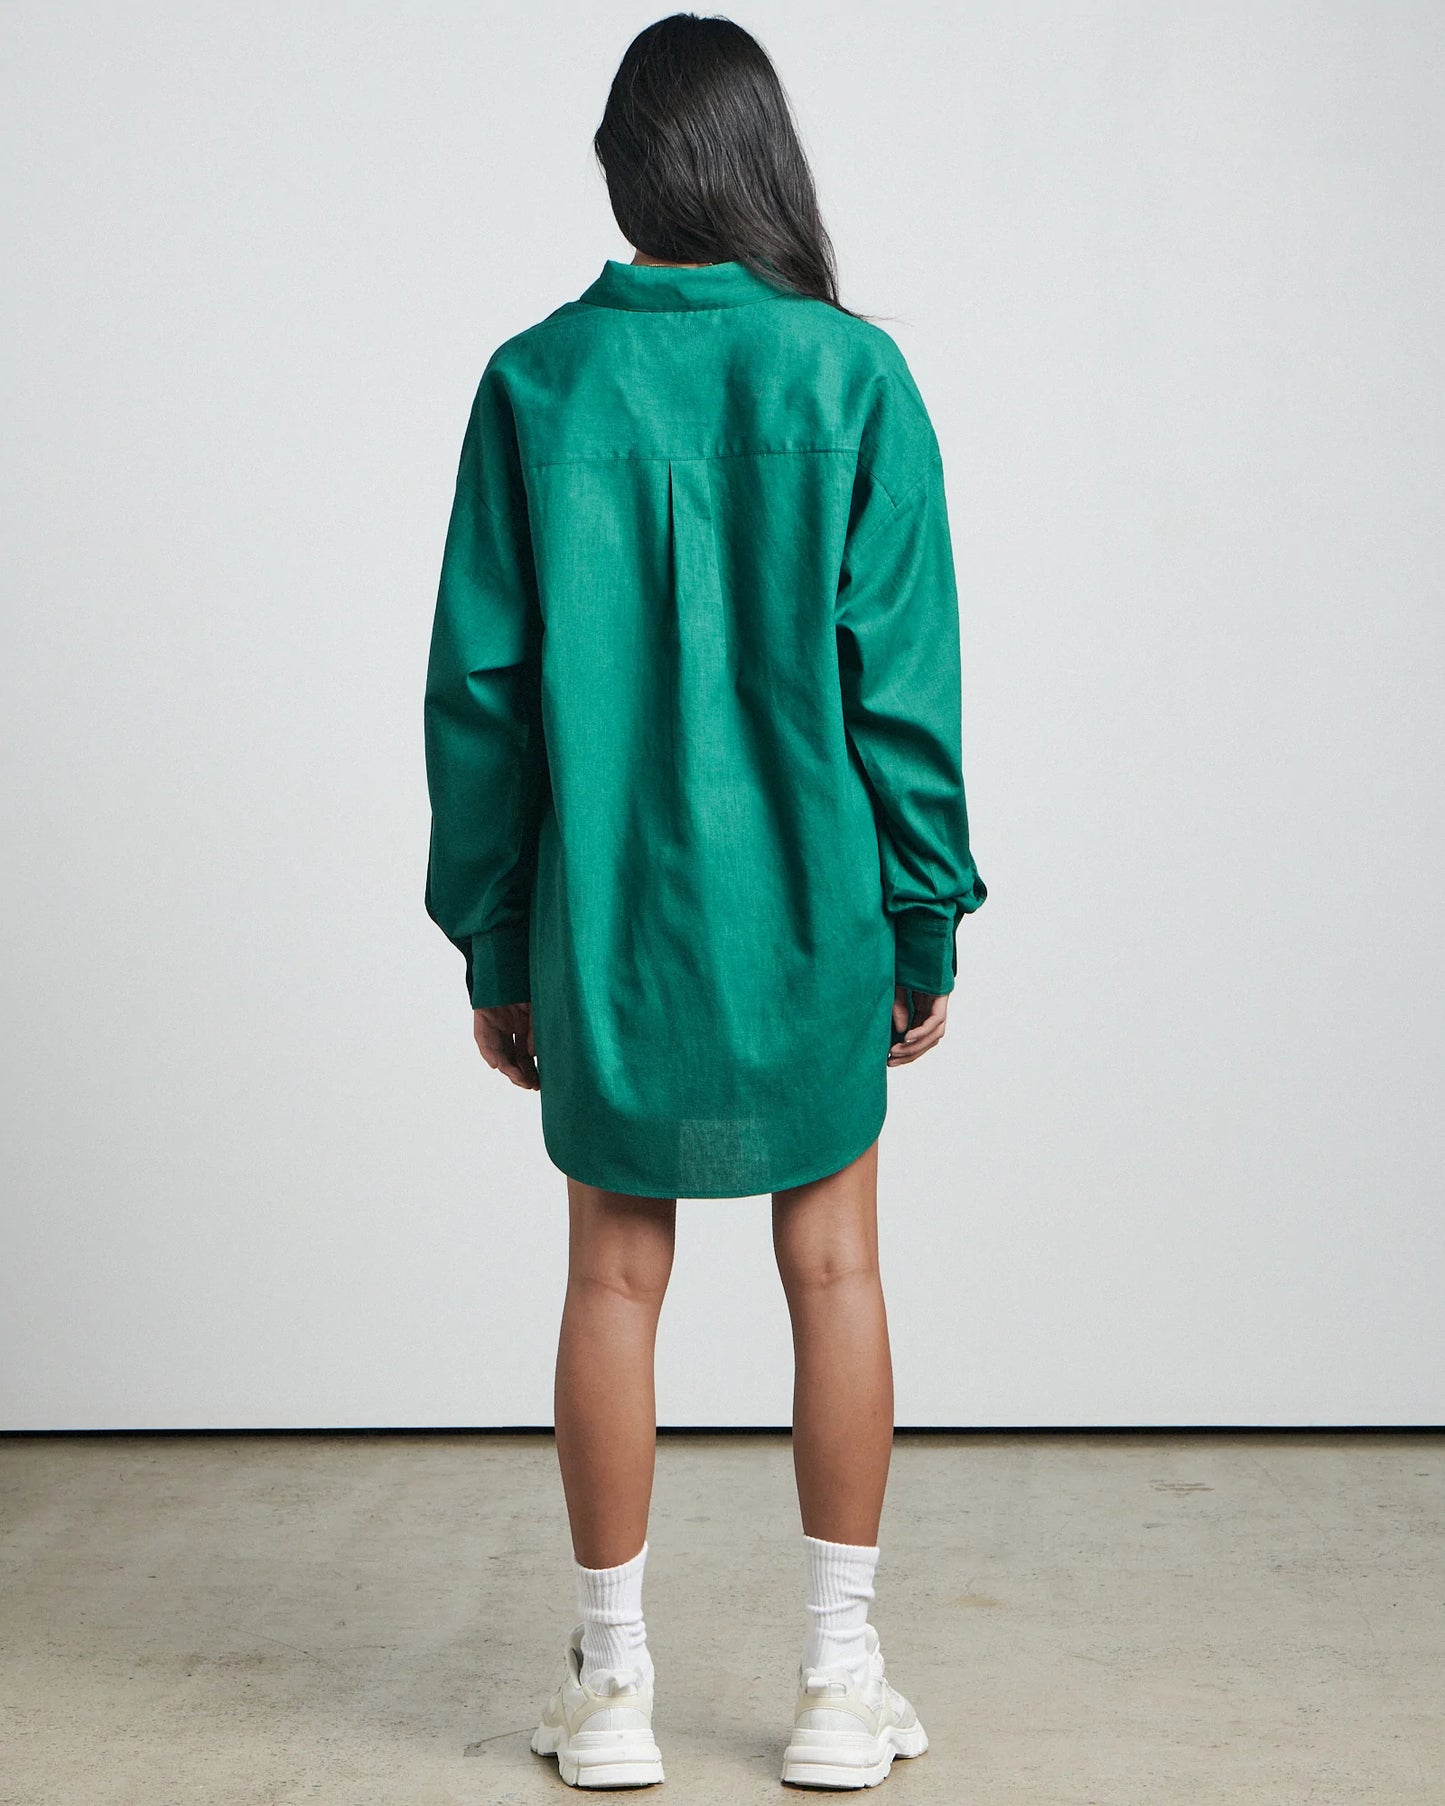 CHARLIE HOLIDAY BARE // The Long Sleeve Shirt PALM LEAF GREEN